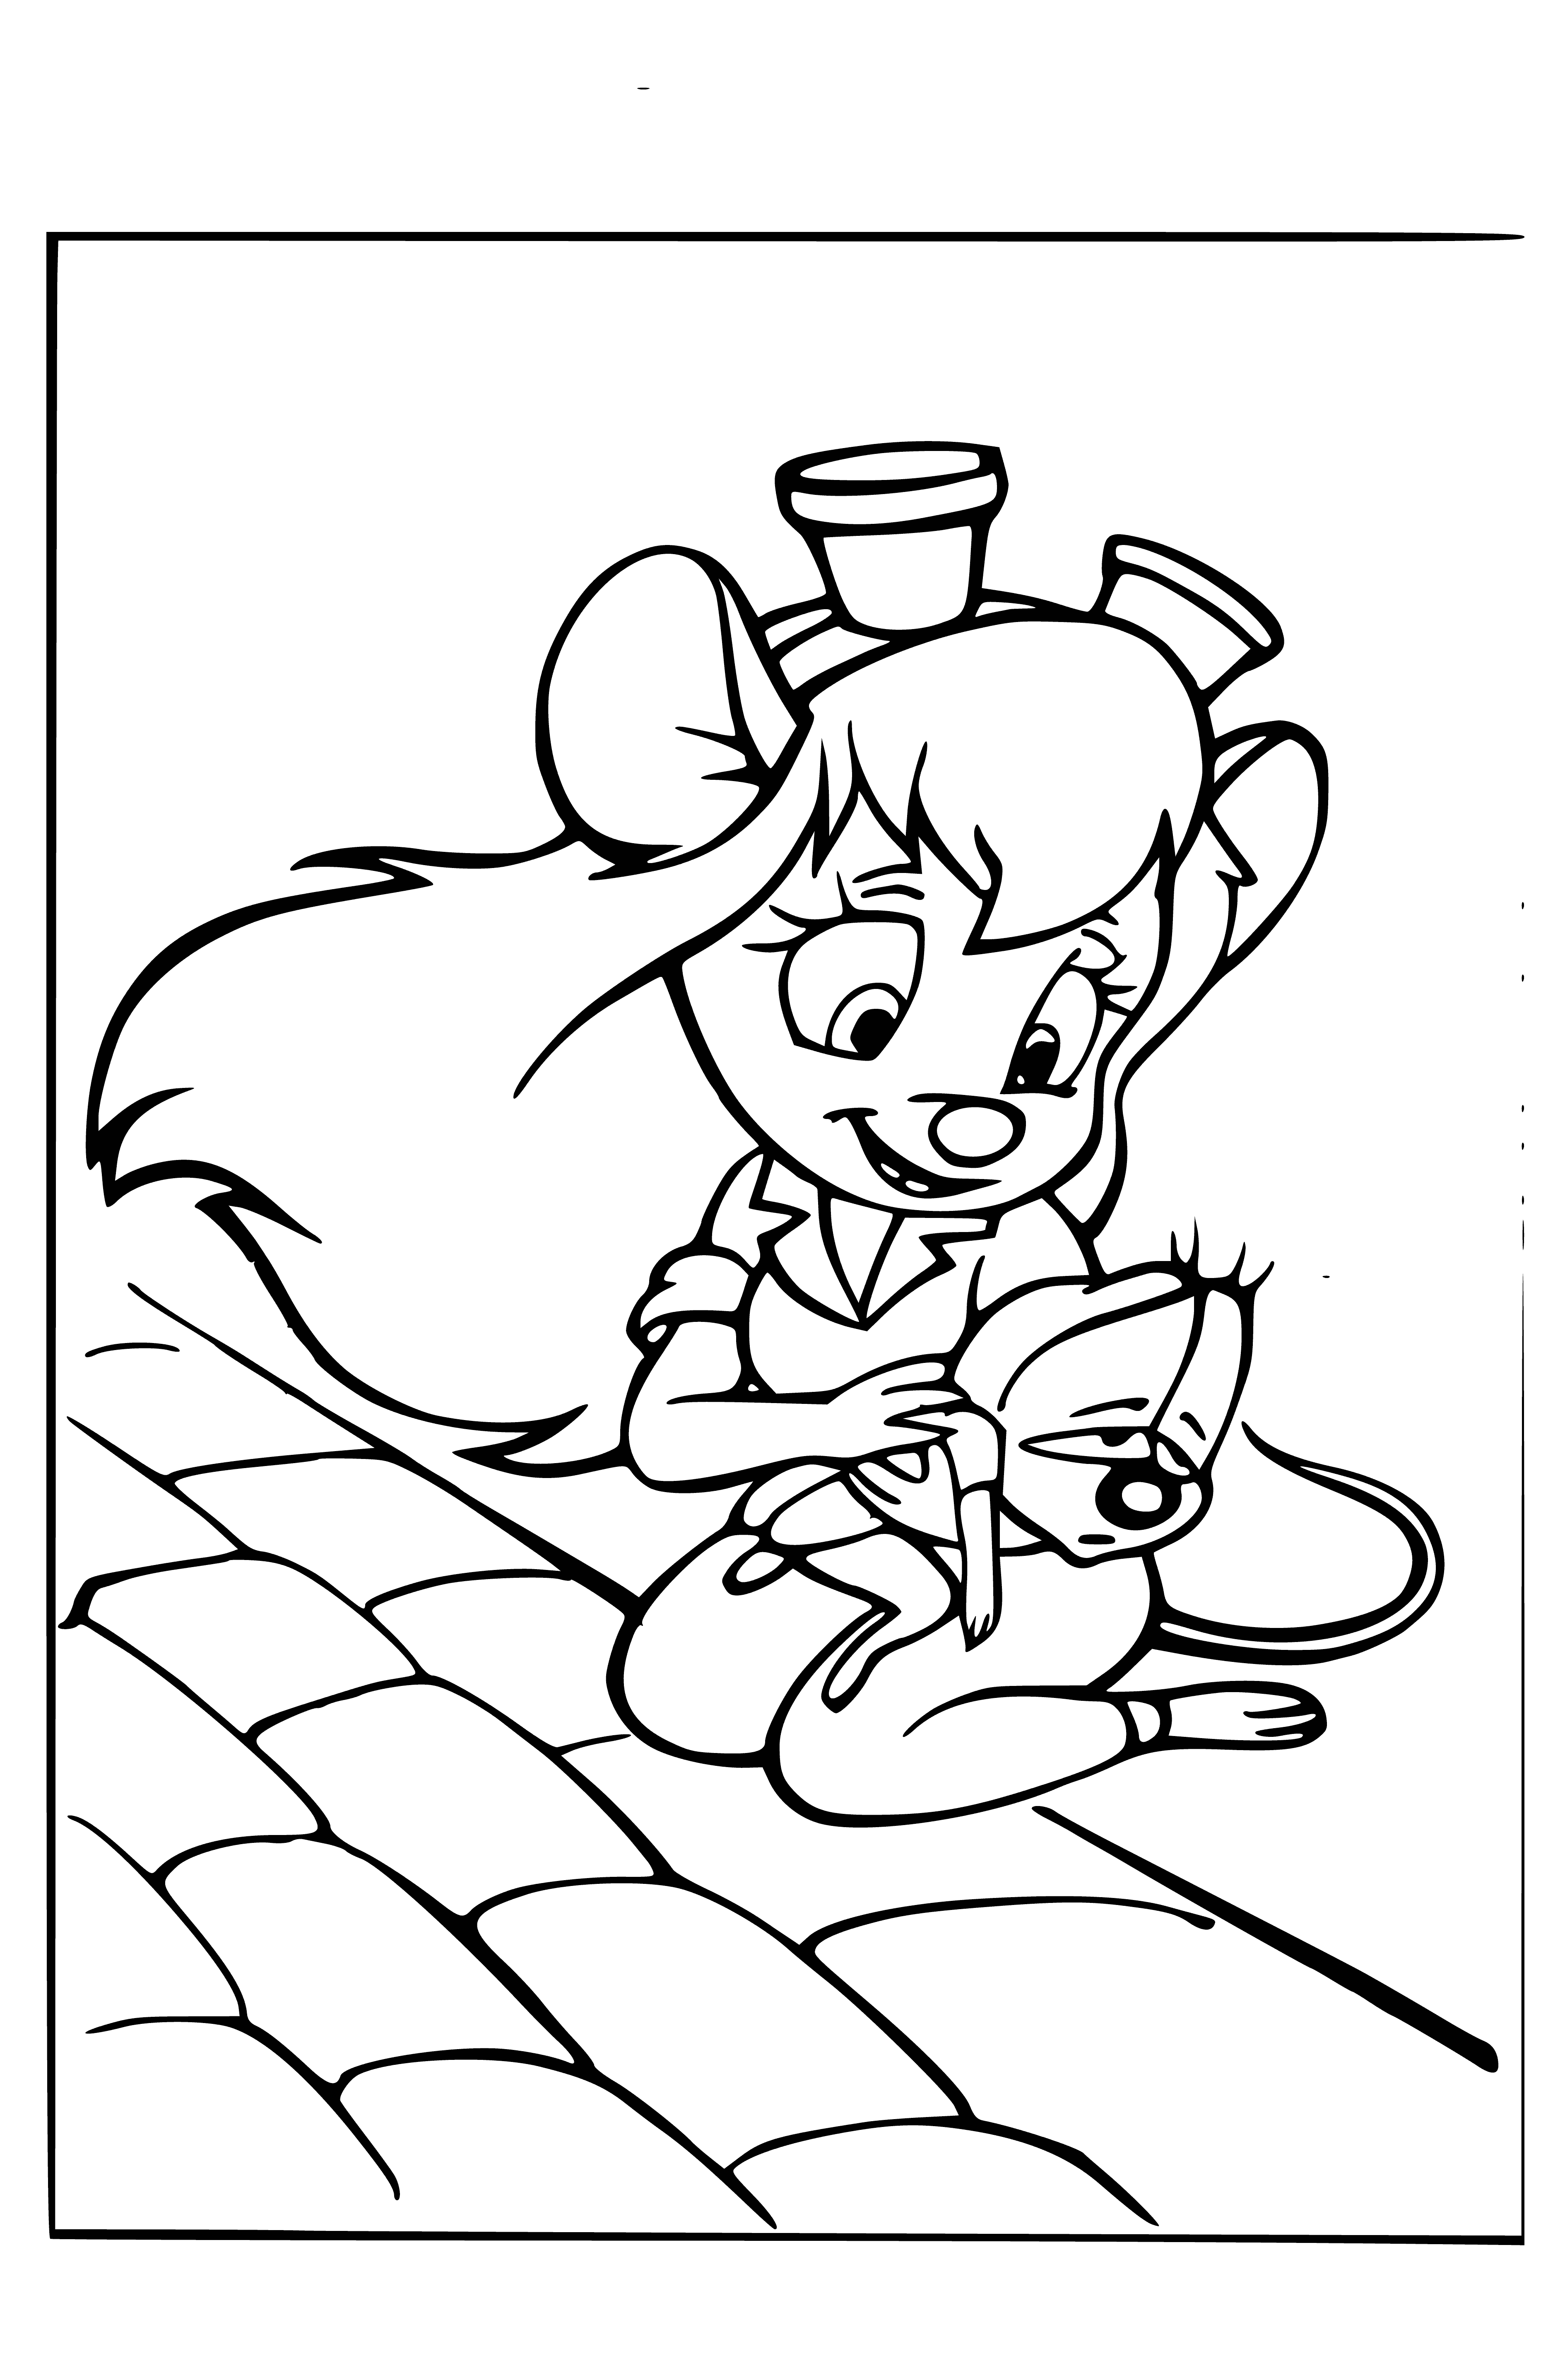 coloring page: Chip: small, big ears, brown coat; Dale: small, white coat, big black eyes; Gadget: robotic, white, blue eyes; Zipper: robotic fly, black, red eyes.